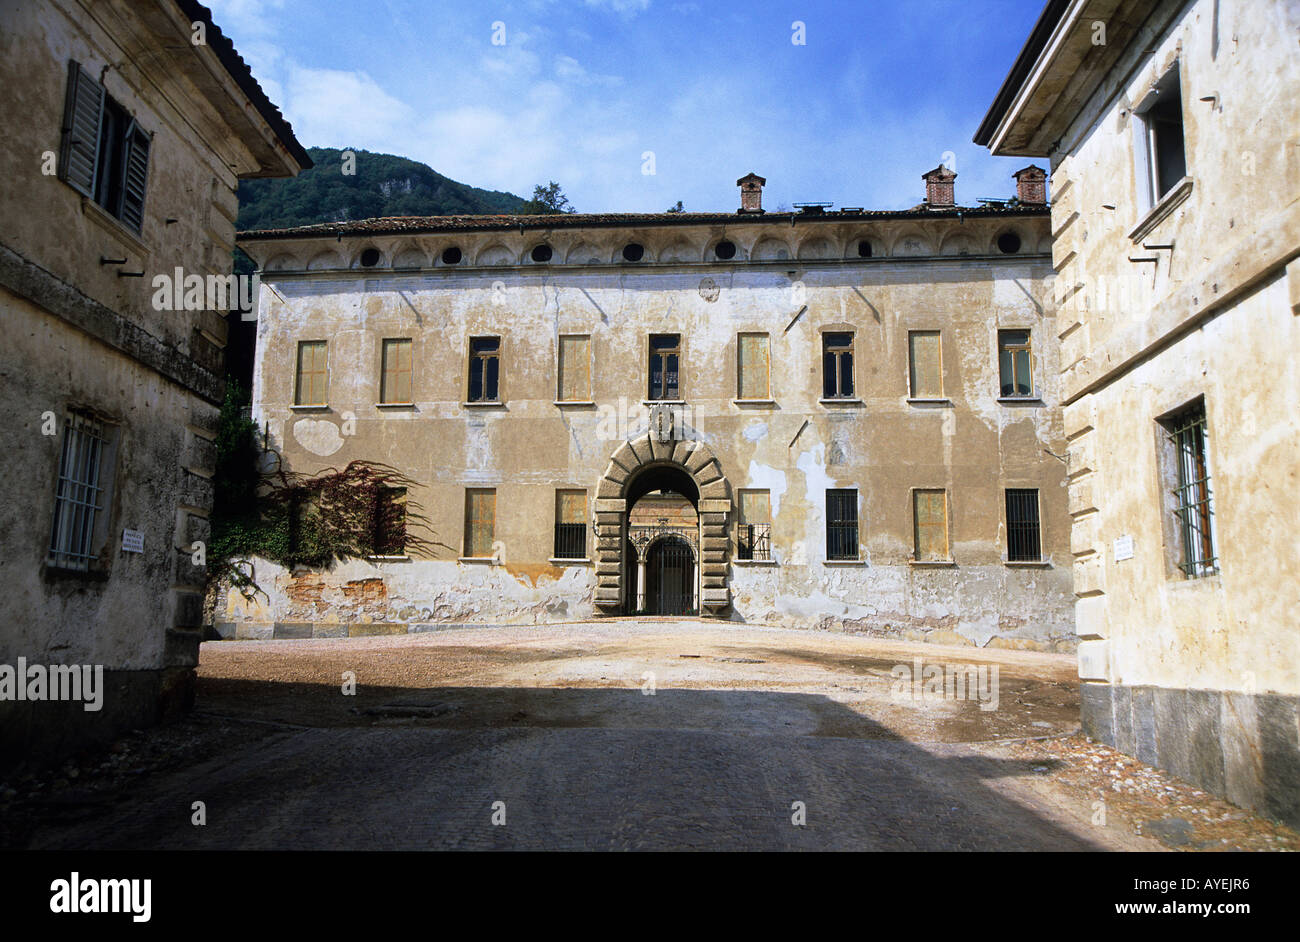 Exterior of Villa Cicogna Mozzoni Bisuschio near Varese It is a classical example of a rural Renaissance villa surrounded by an Italian garden The garden was the decision of Ascanio Mozzoni d 1593 This work was continued by Carlo Cicogna Mozzoni 1618 1690 Stock Photo